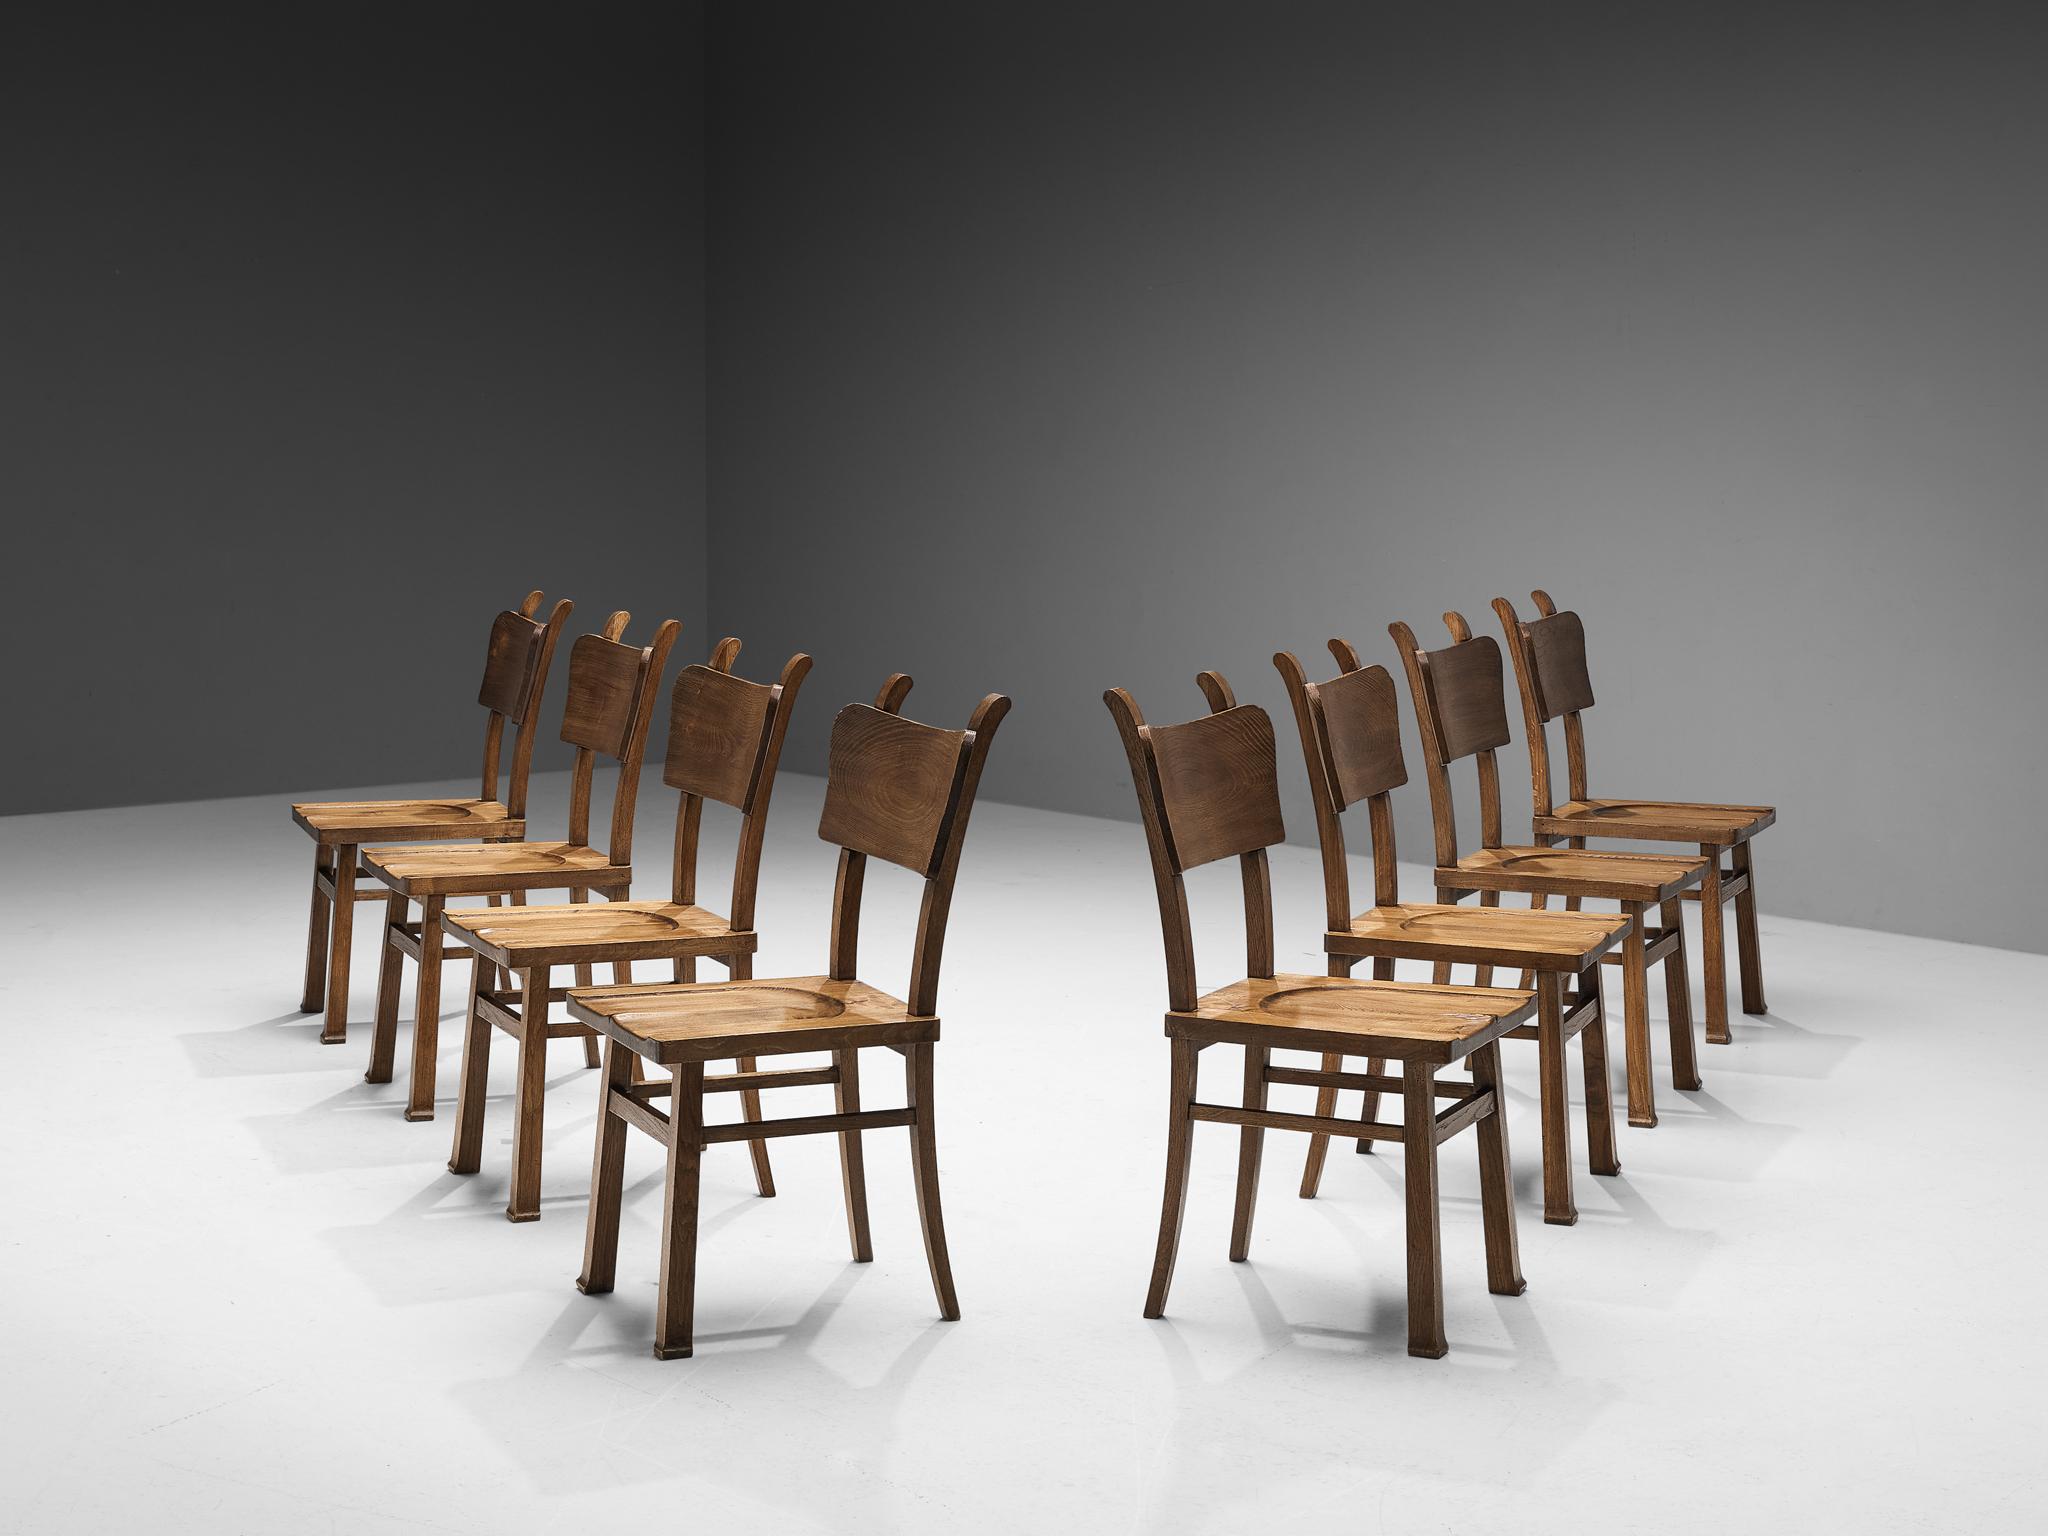 Ernesto Valabrega, set of eight dining chairs, oak, Italy, ca. 1935

These well-sculpted chairs embody an evolved rustic character with great quality of elegance and are created in one of the most influential periods for the arts namely the Art